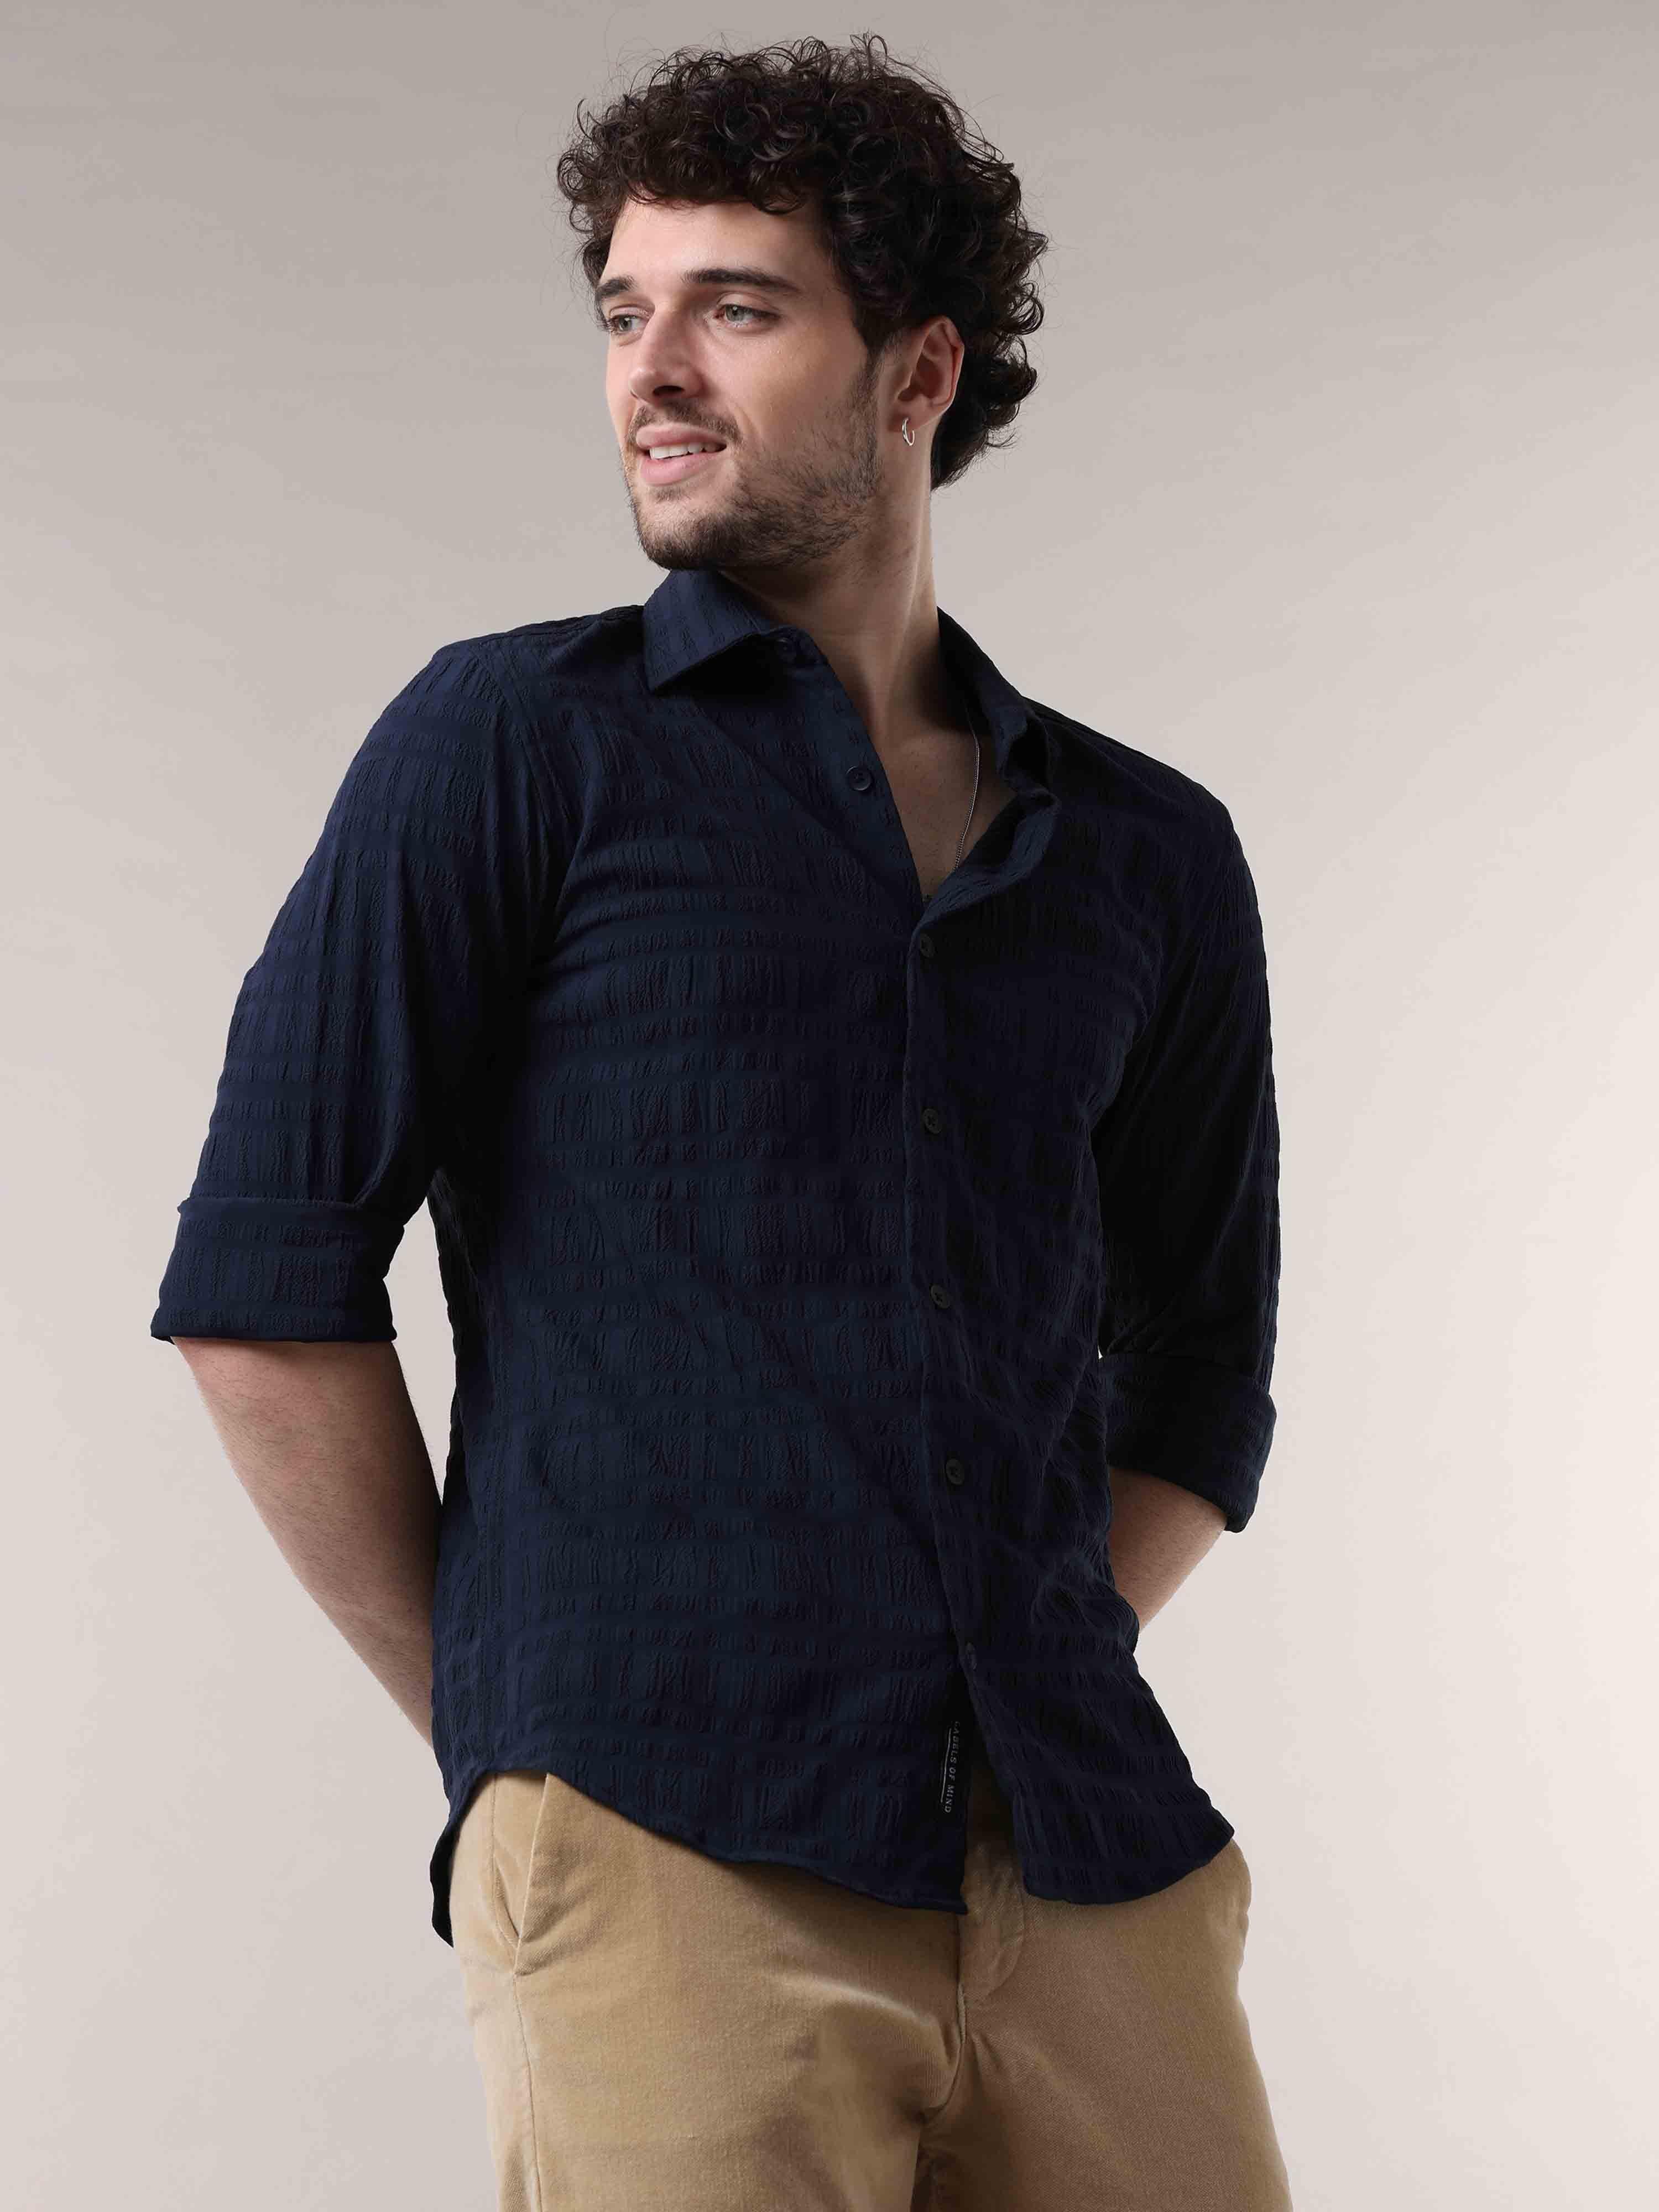 Buy Latest Celetial Navy Blue Colour Shirt OnlineRs. 1349.00